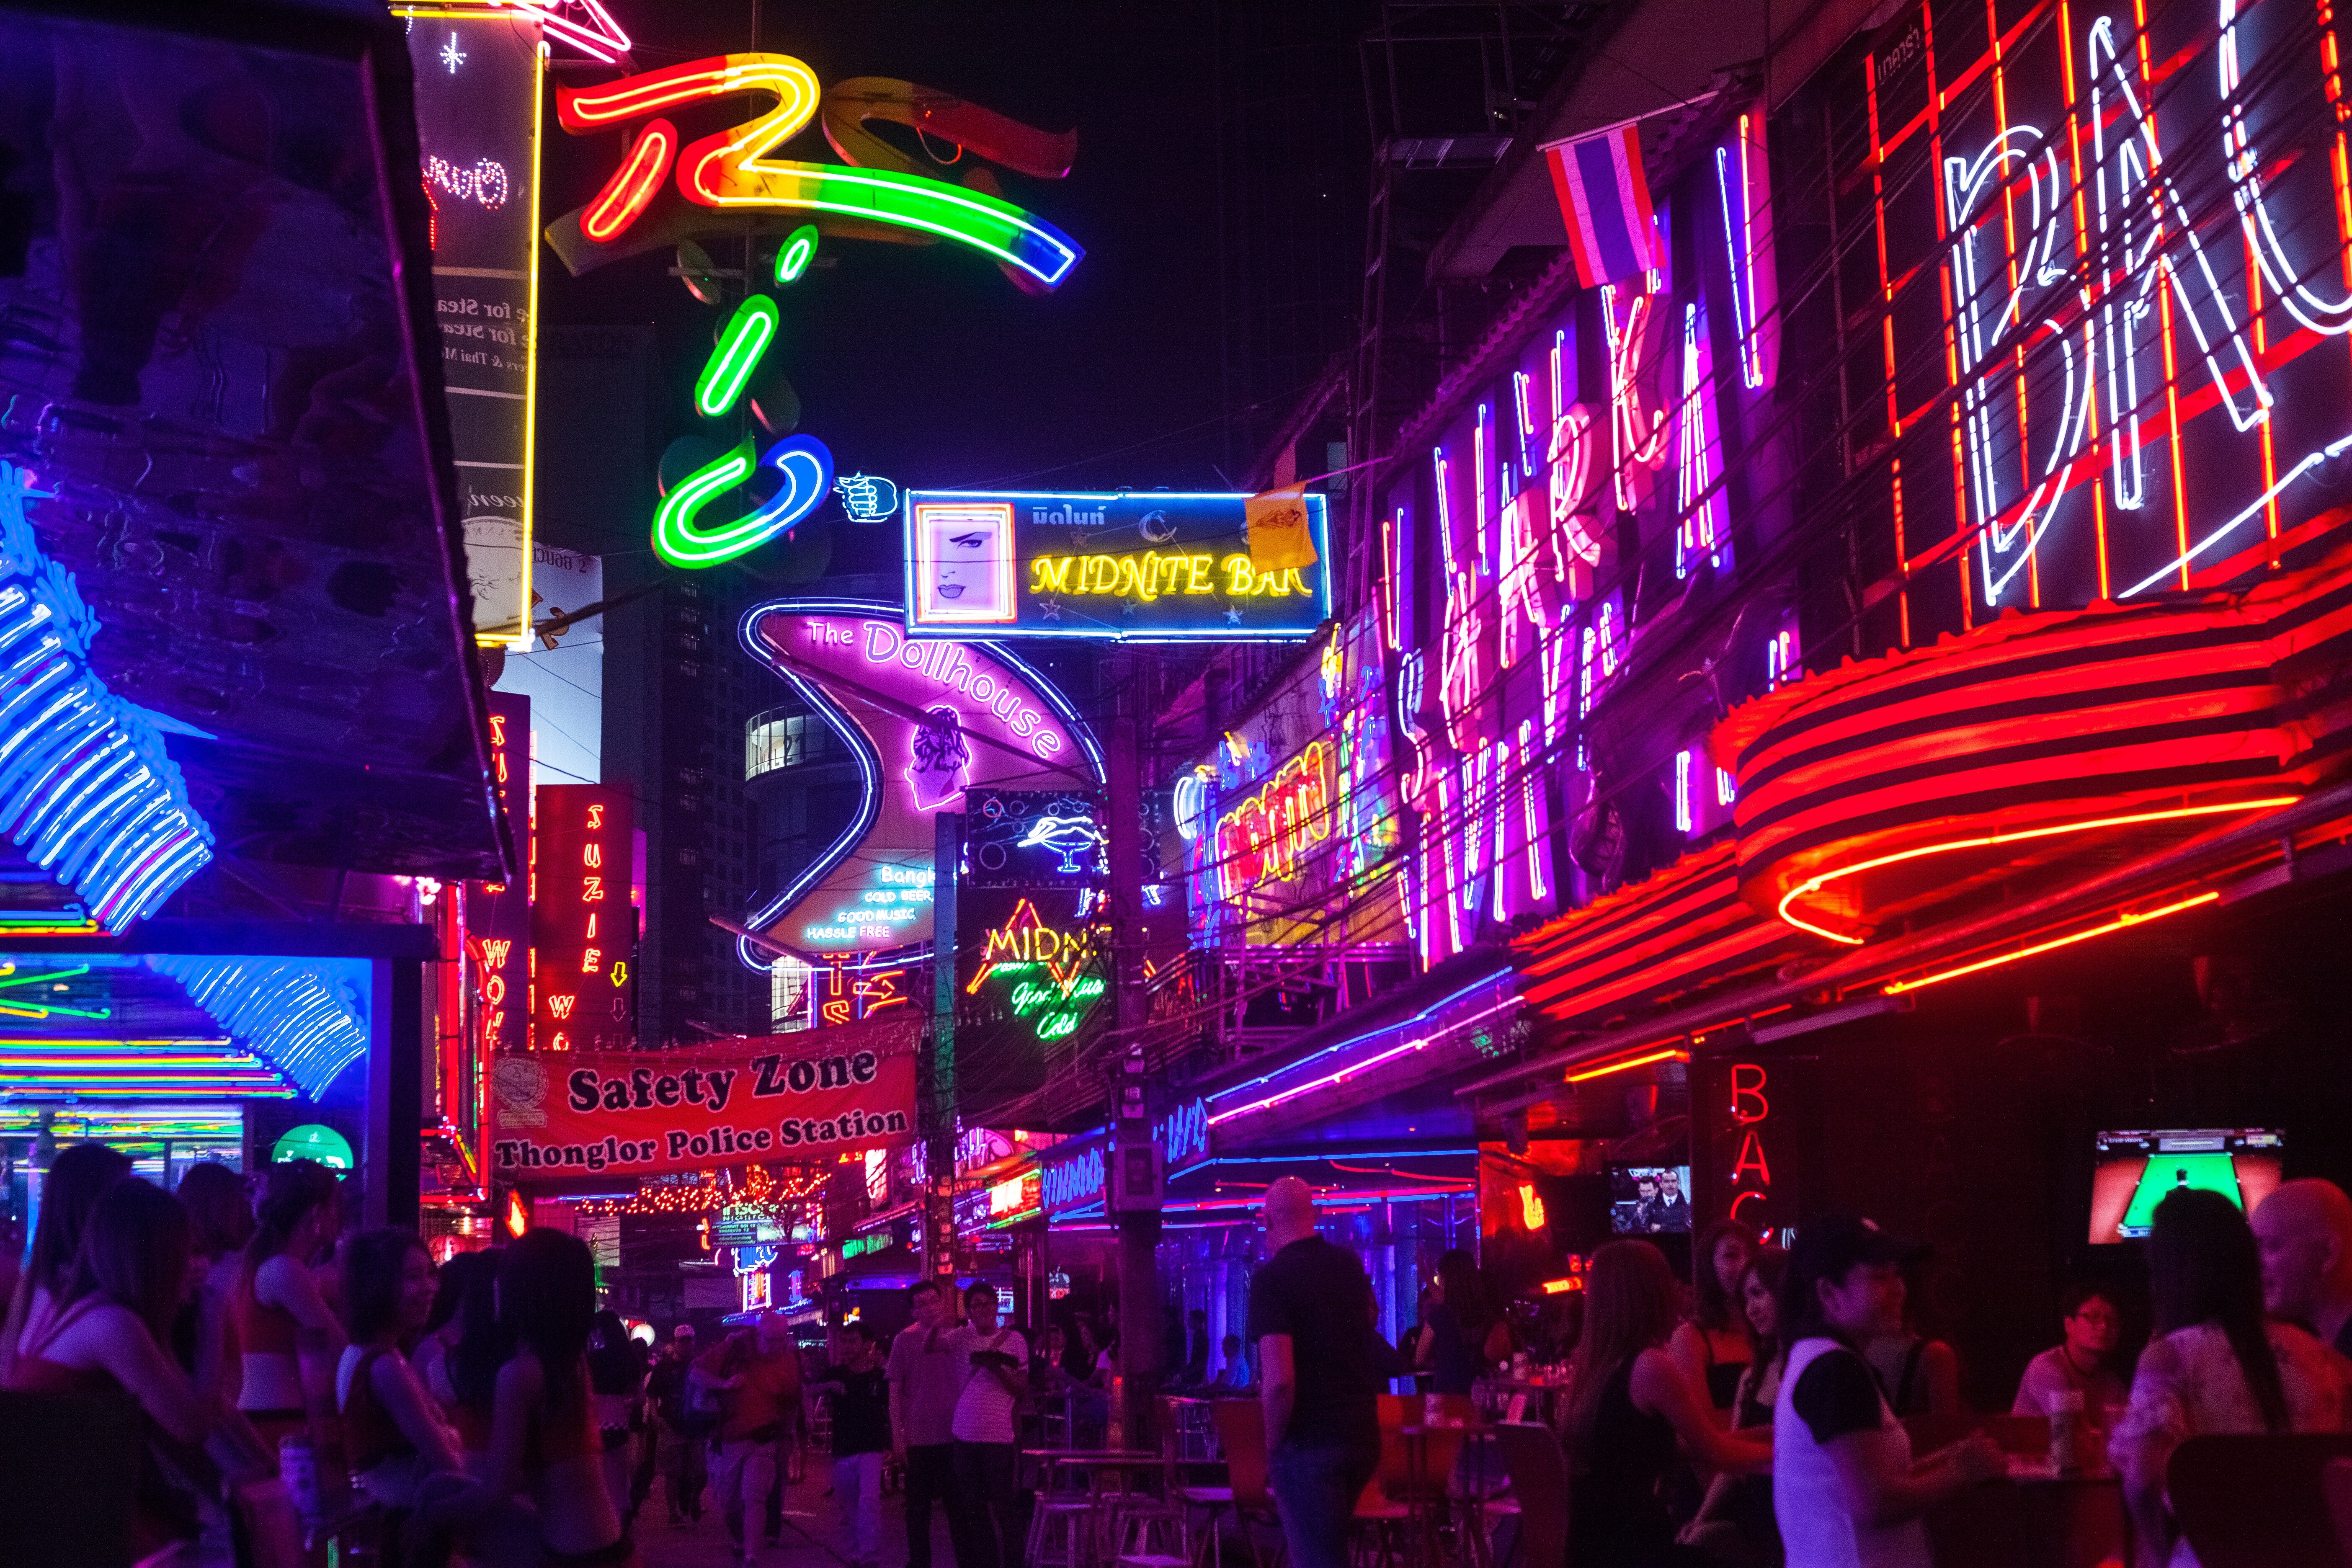 The nightlife and characters of places such as Soi Cowboy (pictured), a street in Bangkok’s red light district, has given expat crime writers inspiration for their colourful stories. Photo: Getty Images